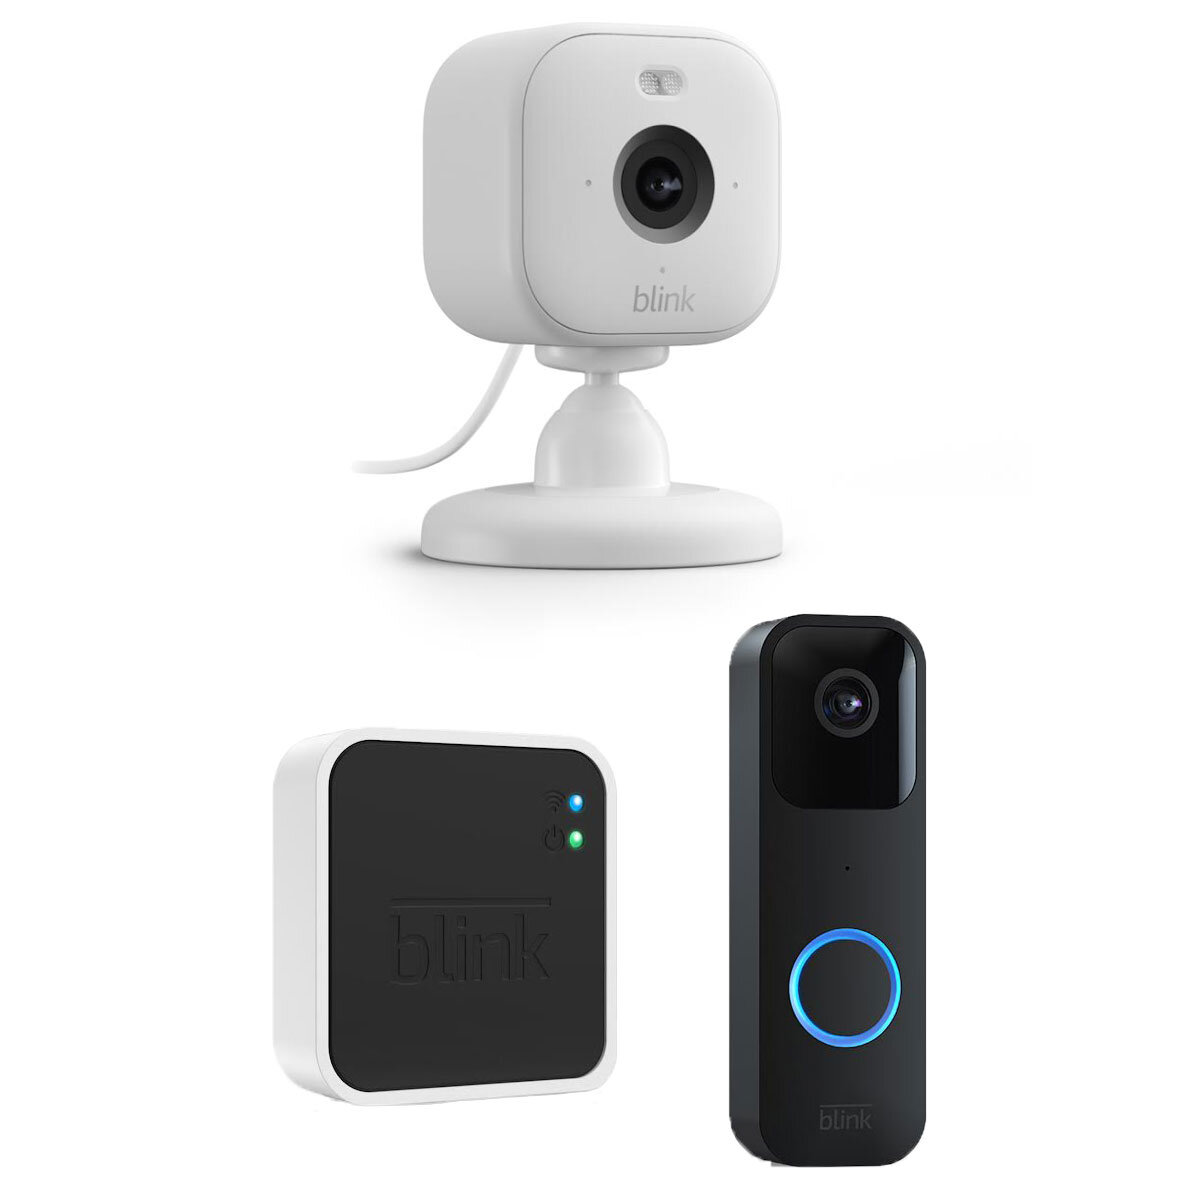 image of camera and doorbell